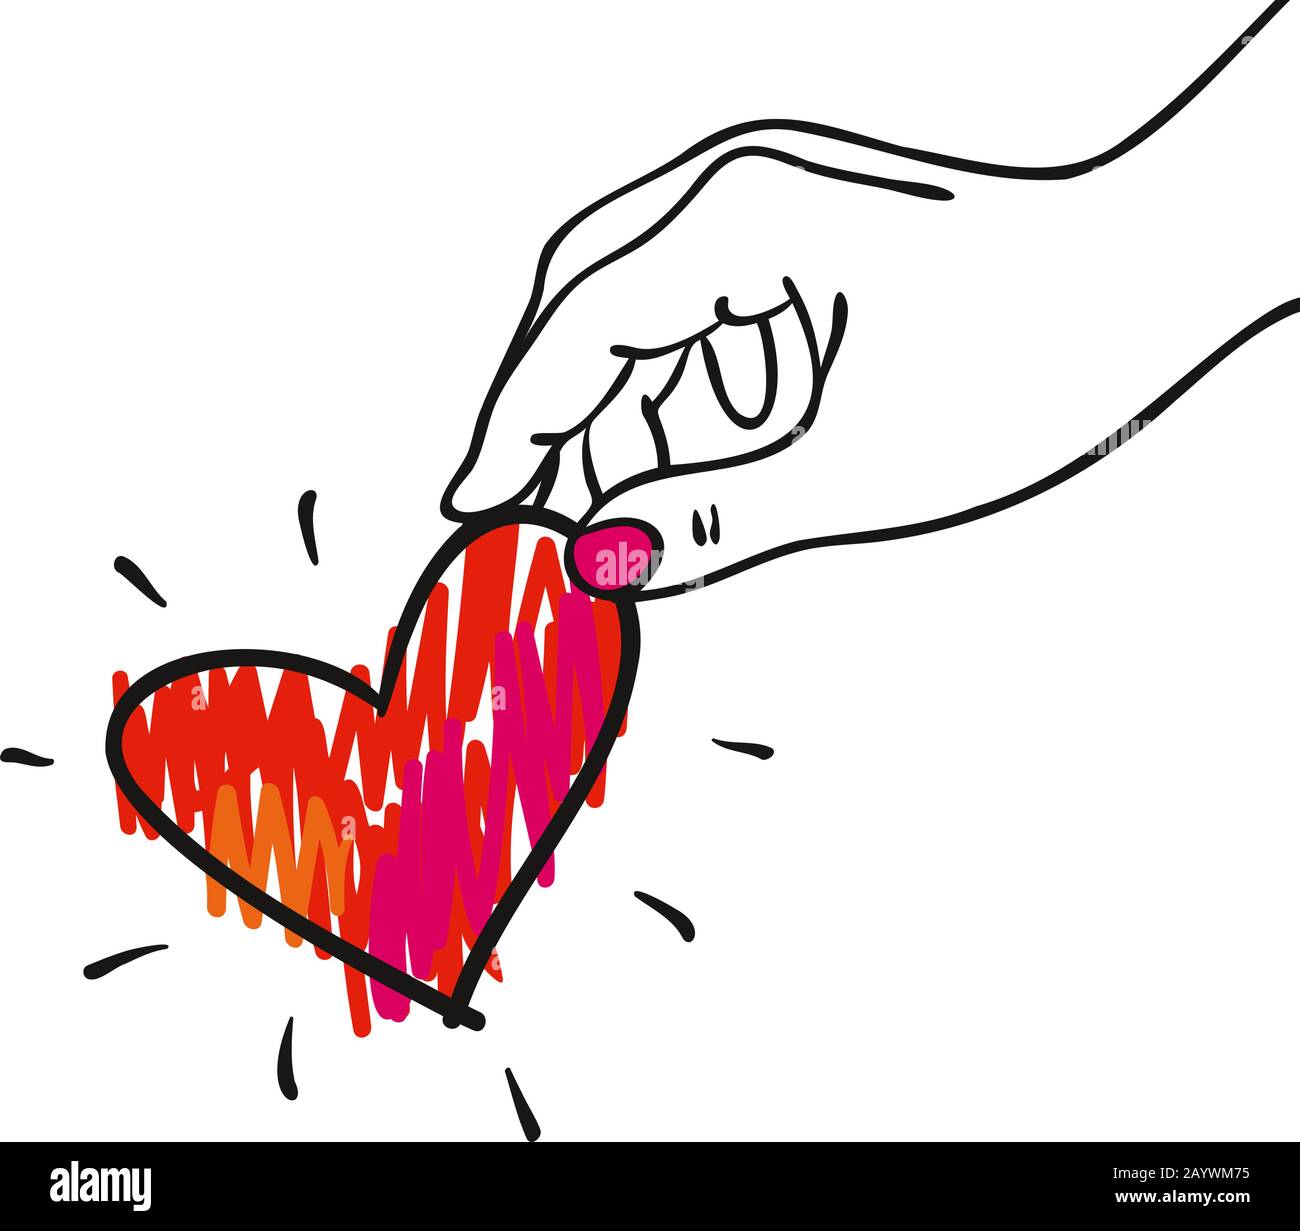 Give away his heart - Hand with decorative red-pink heart- hand-drawn vector illustration for banners, cards Stock Vector